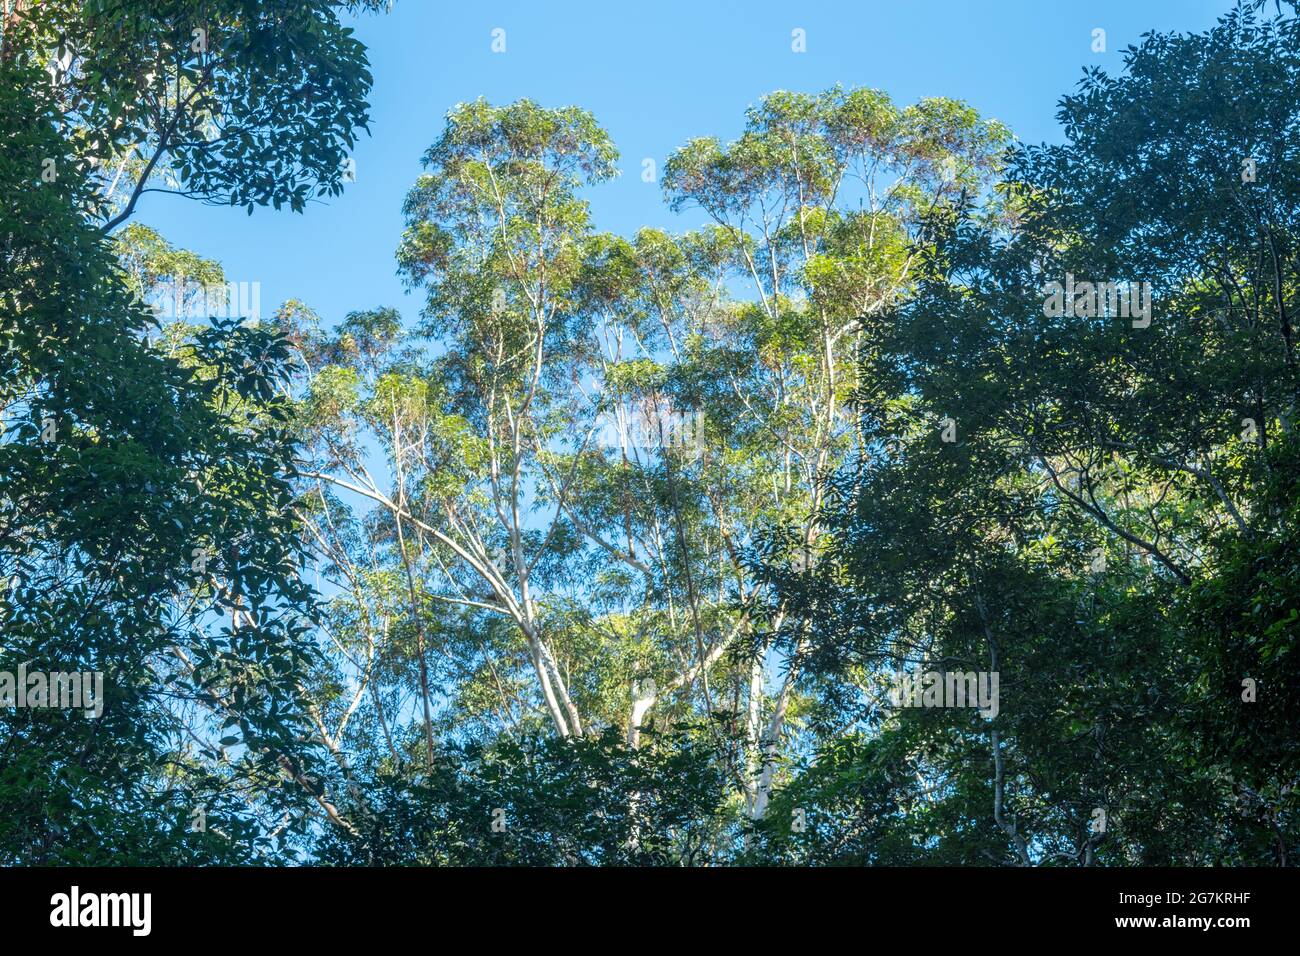 Low angle view of trees in the Australian bush against blue sky Stock Photo